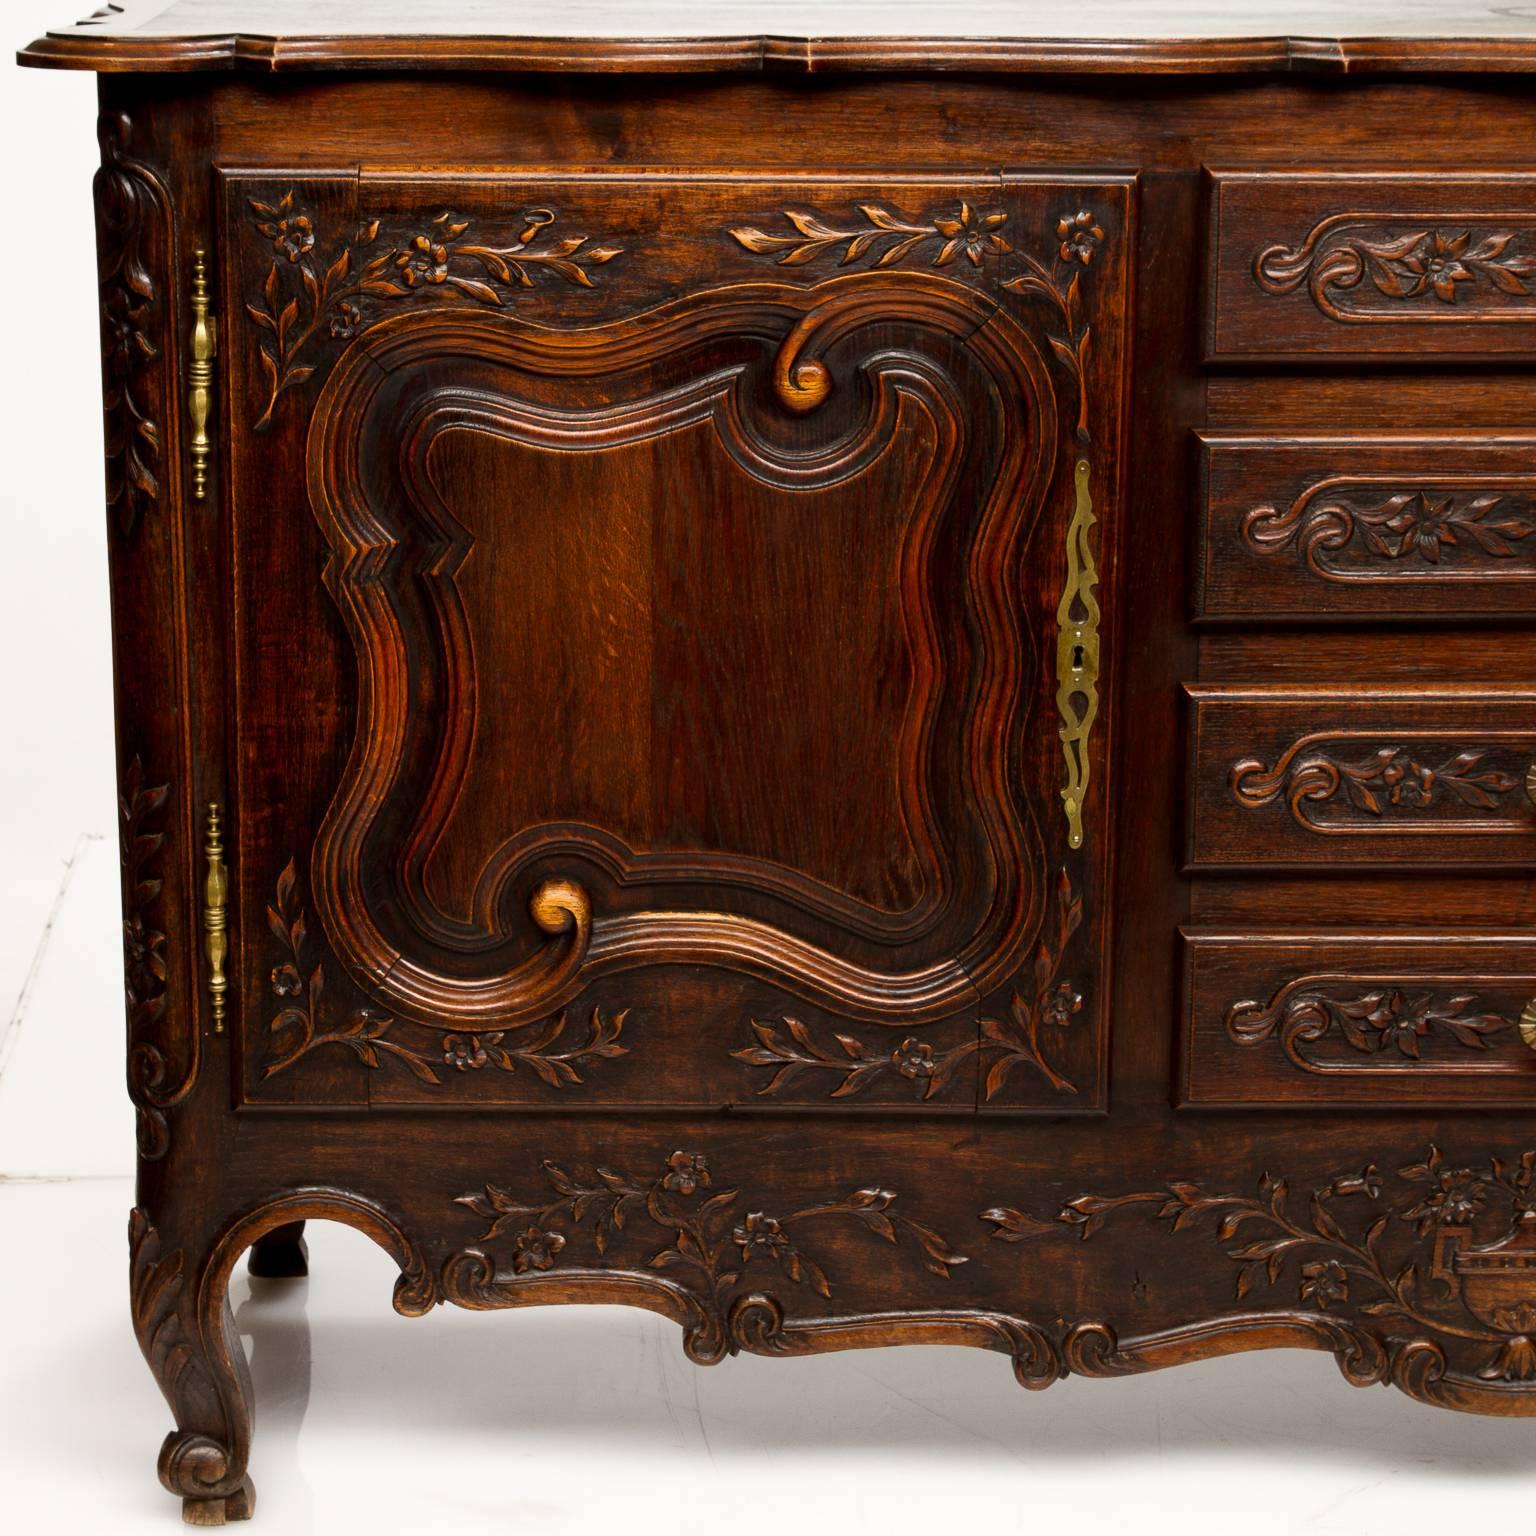 A French Provincial oak and elm 19th century buffet. This buffet has elaborate carvings, a leaf and vine with florals, shaped top, large scroll raised panel doors divided by a bank of four drawers, the apron is centered with a pastoral floral basket